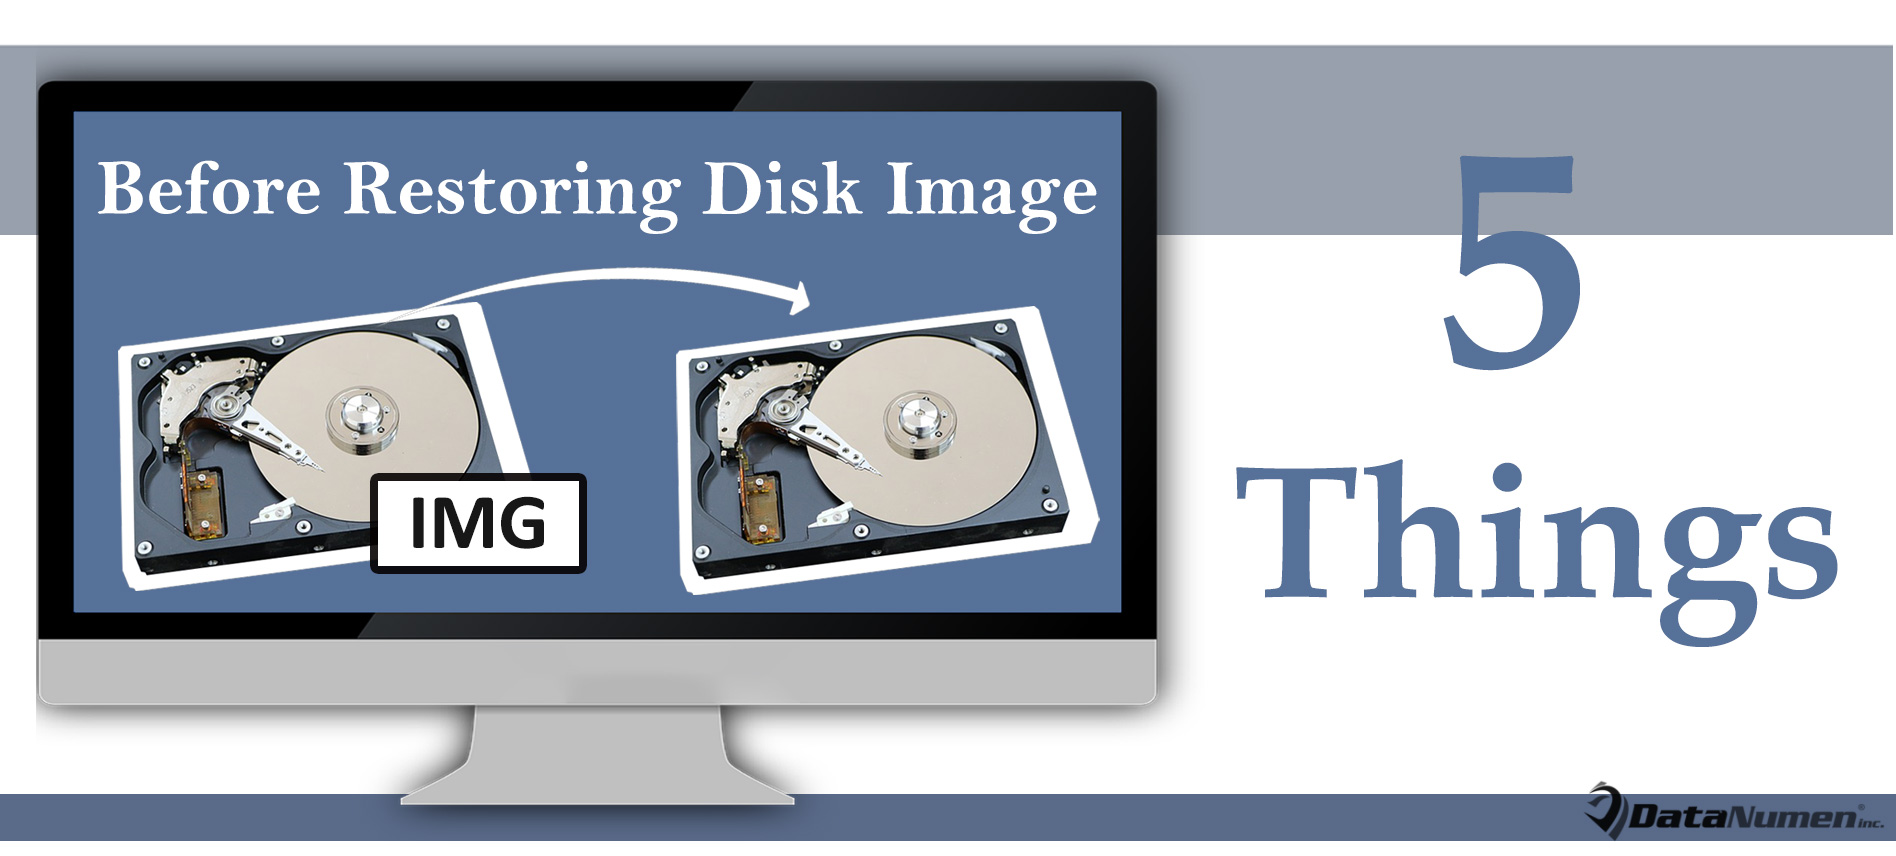 5 Vital Things You Must Do Before Restoring a Disk Image